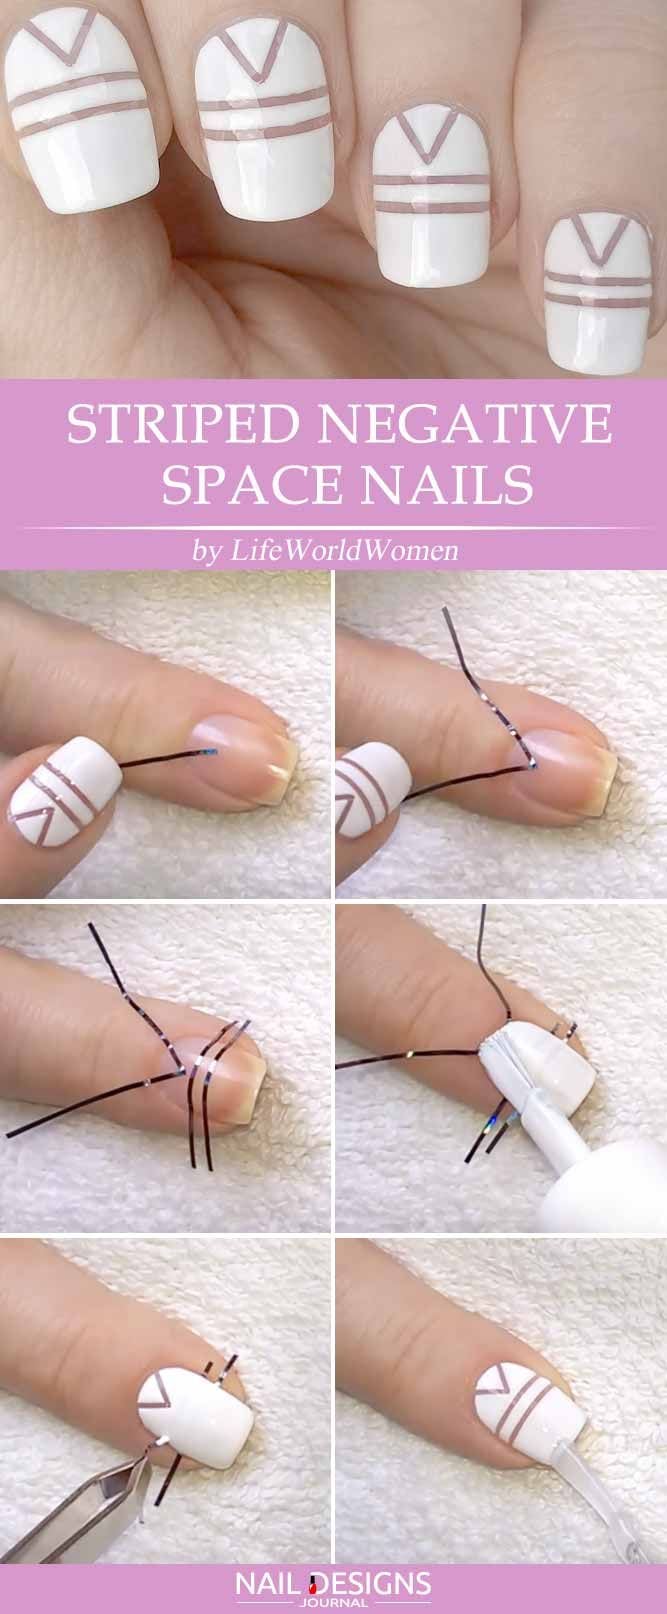 [ad_1]

Easy And Unique Striped Nails Ideas To Pull Of Right Now ★ See more: naildesignsjourna… #nails
Source by ashlov15
[ad_2]
			
			…